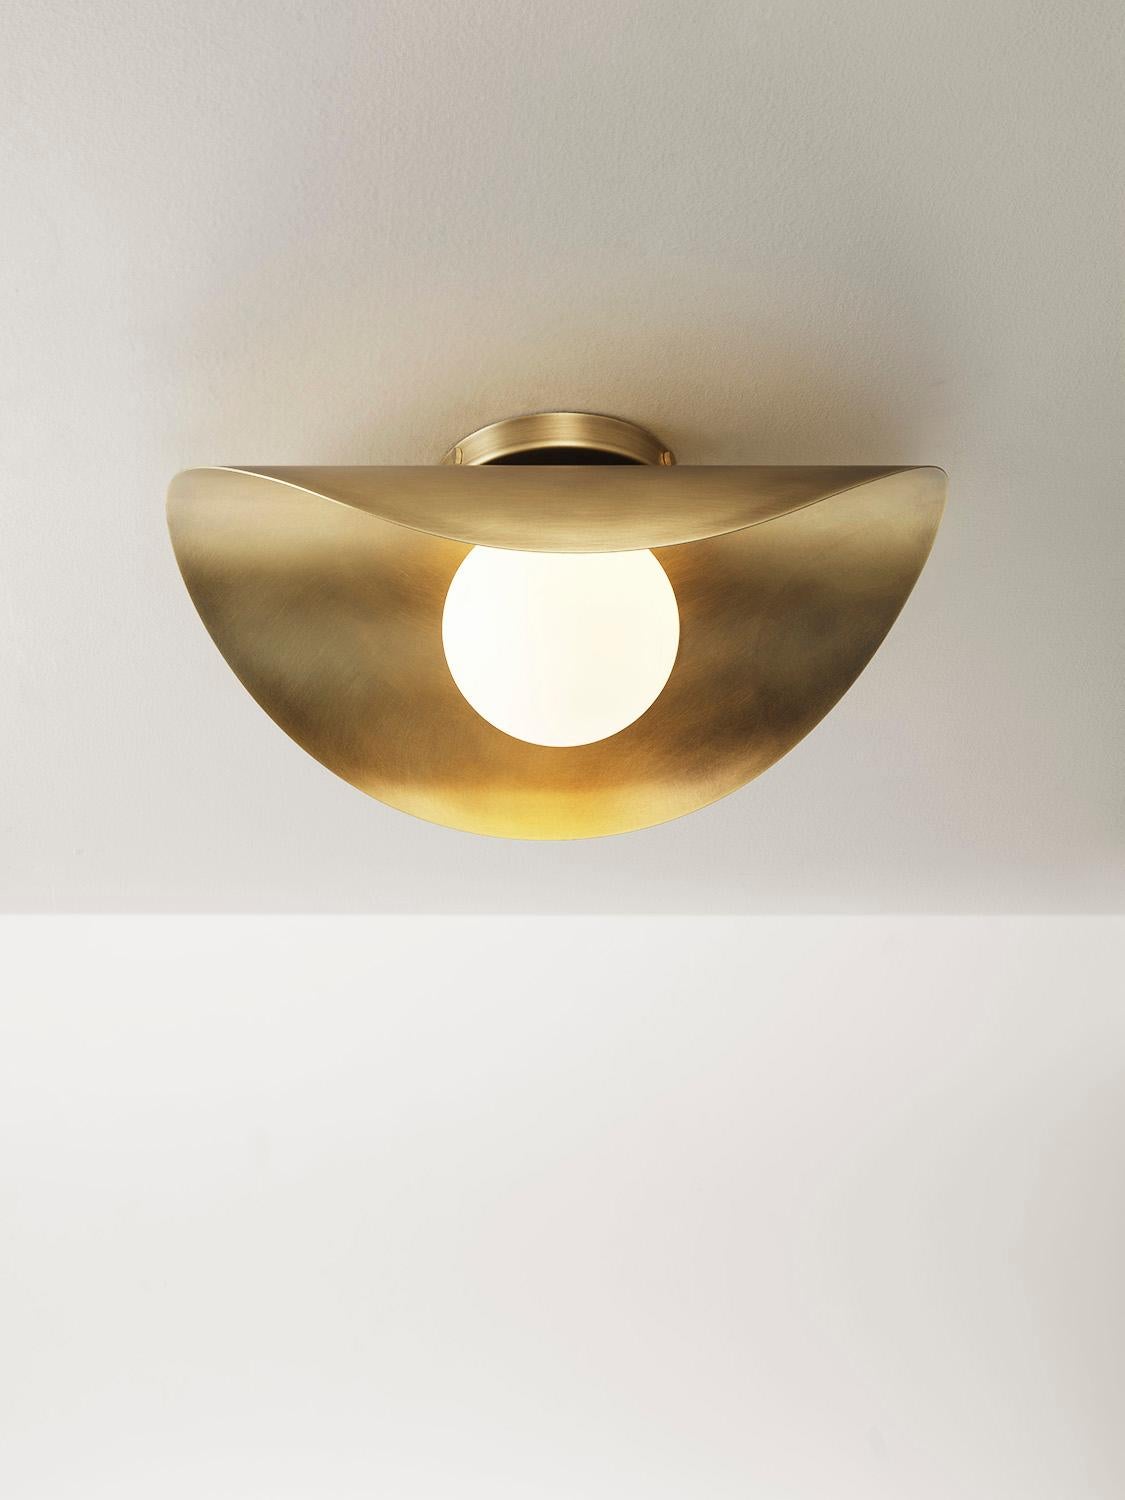 MONTERA Wall Sconce or Flushmount , biomorphic Brass & Glass, Blueprint Lighting For Sale 4